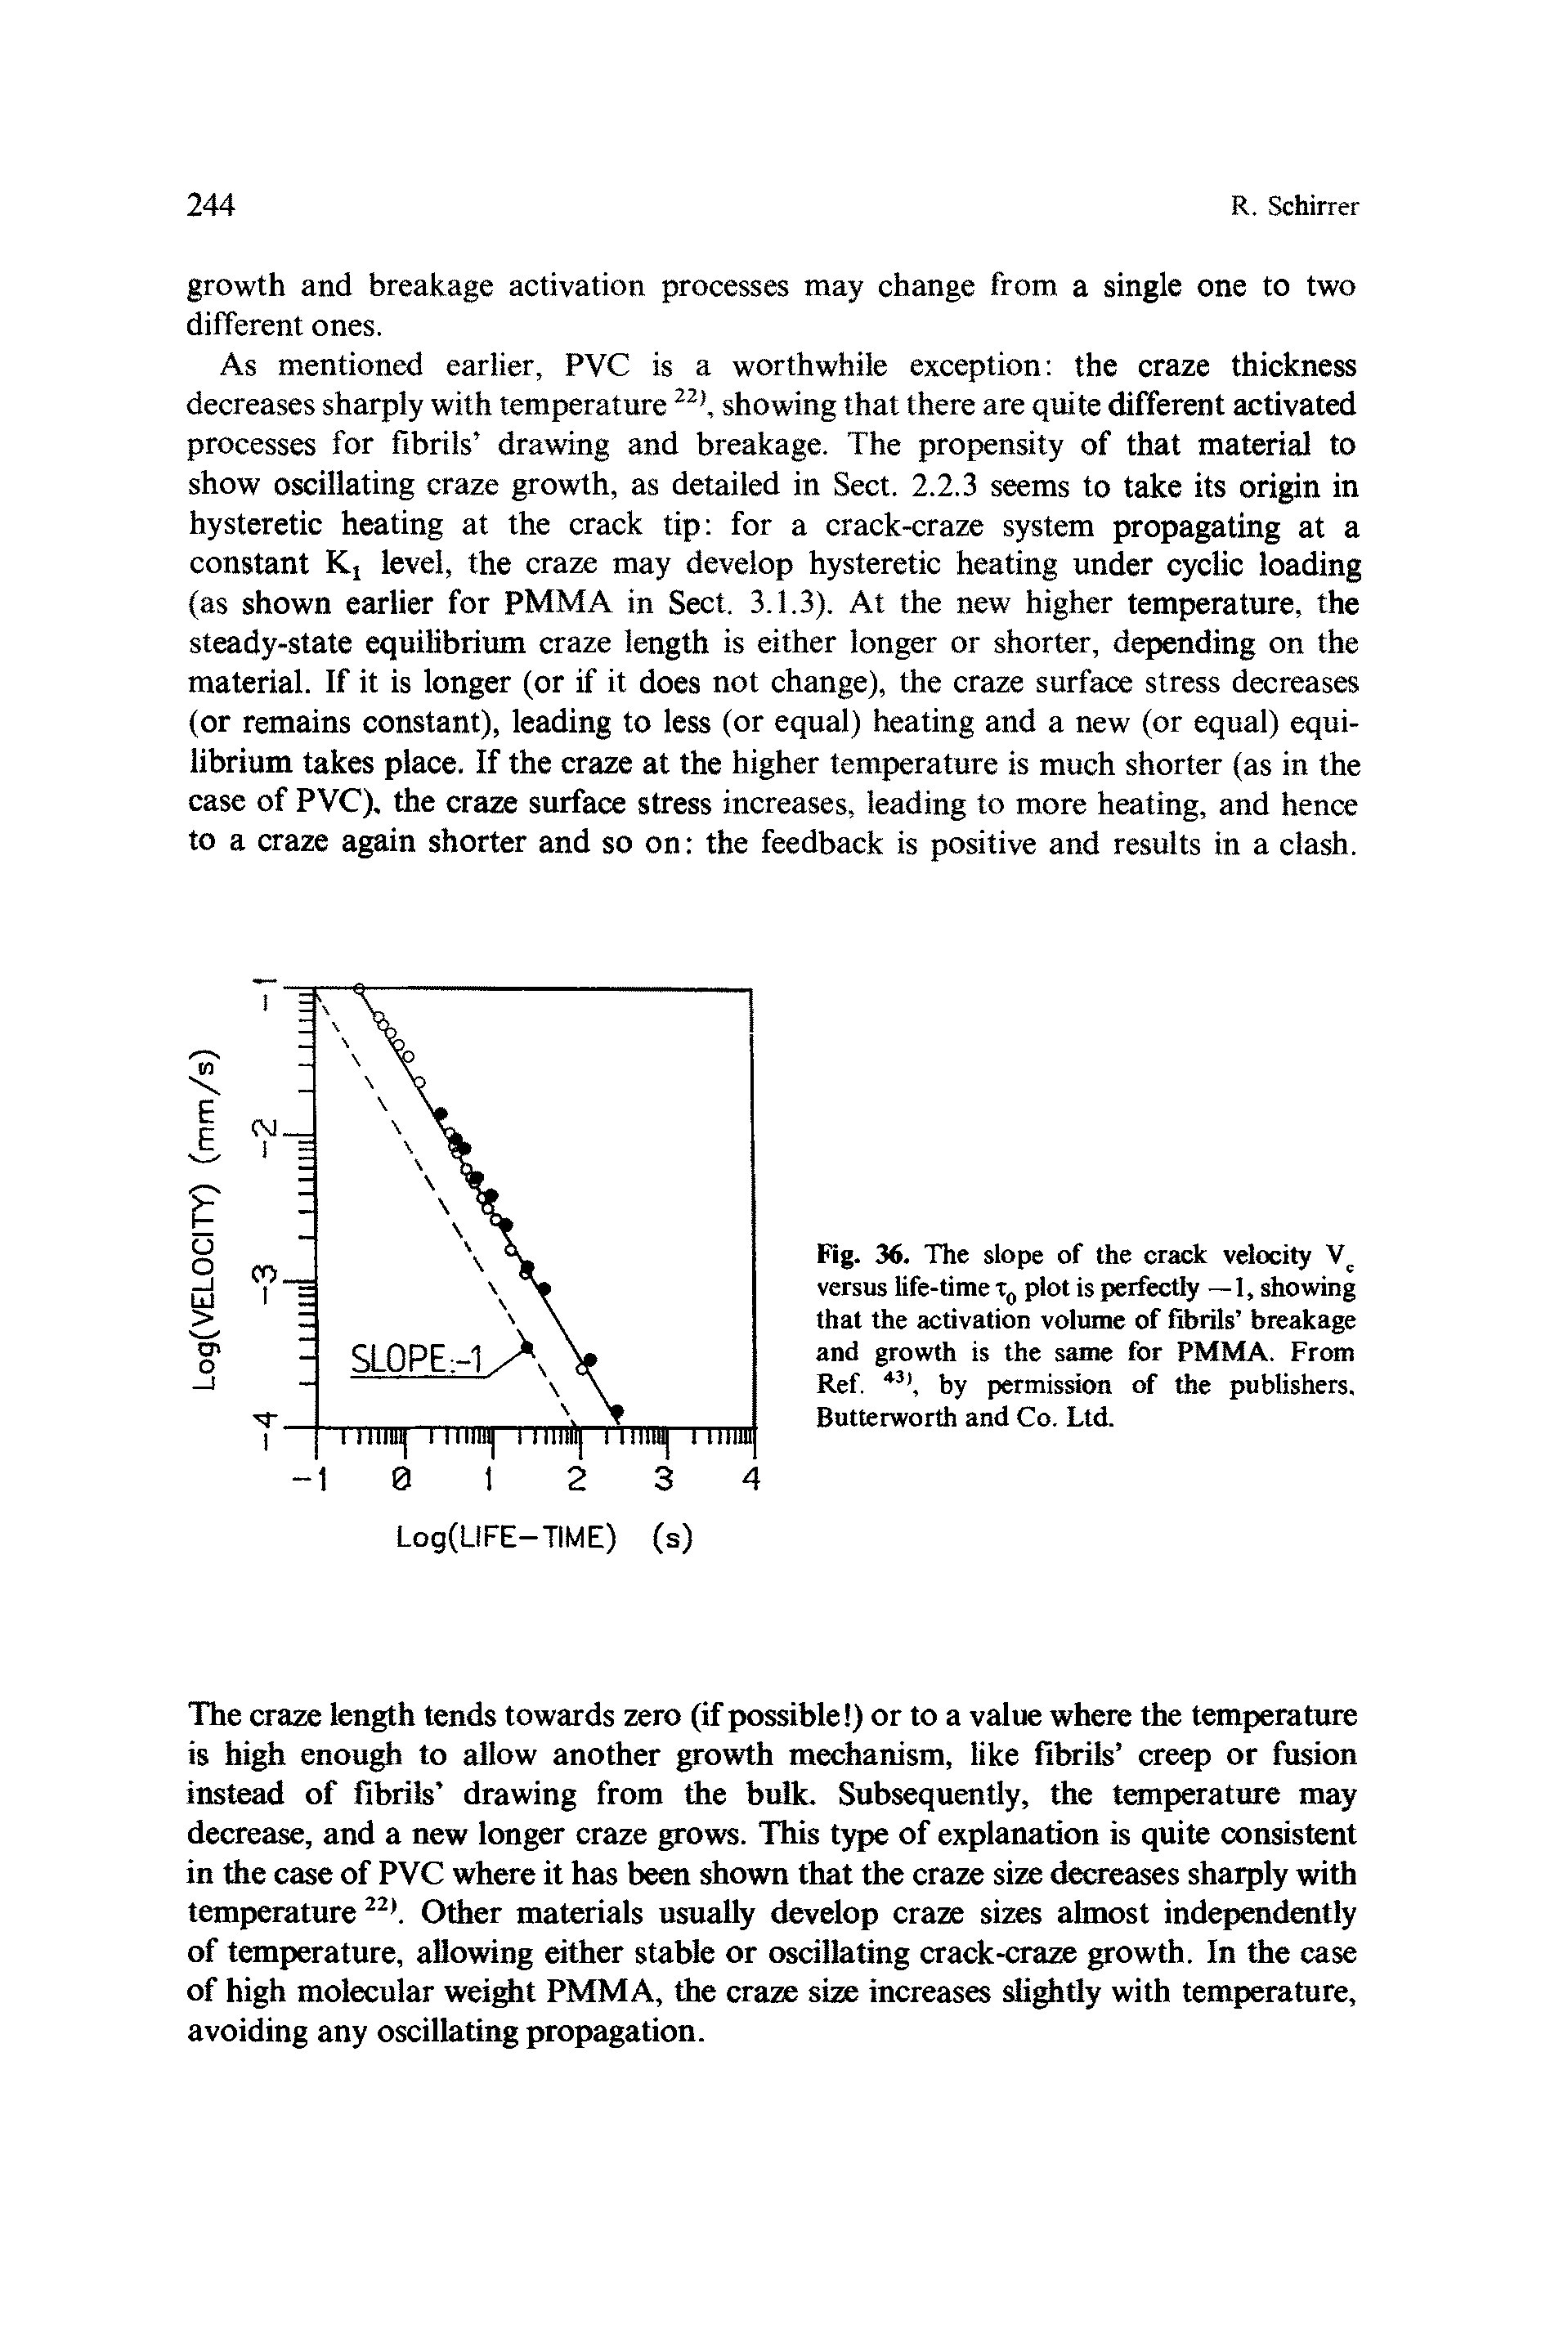 Fig. 36. The slope of the crack velocity versus life-time plot is perfectly — 1, showing that the activation volume of fibrils breakage and growth is the same for PMMA. From Ref. by permission of the publishers. Butterworth and Co. Ltd.